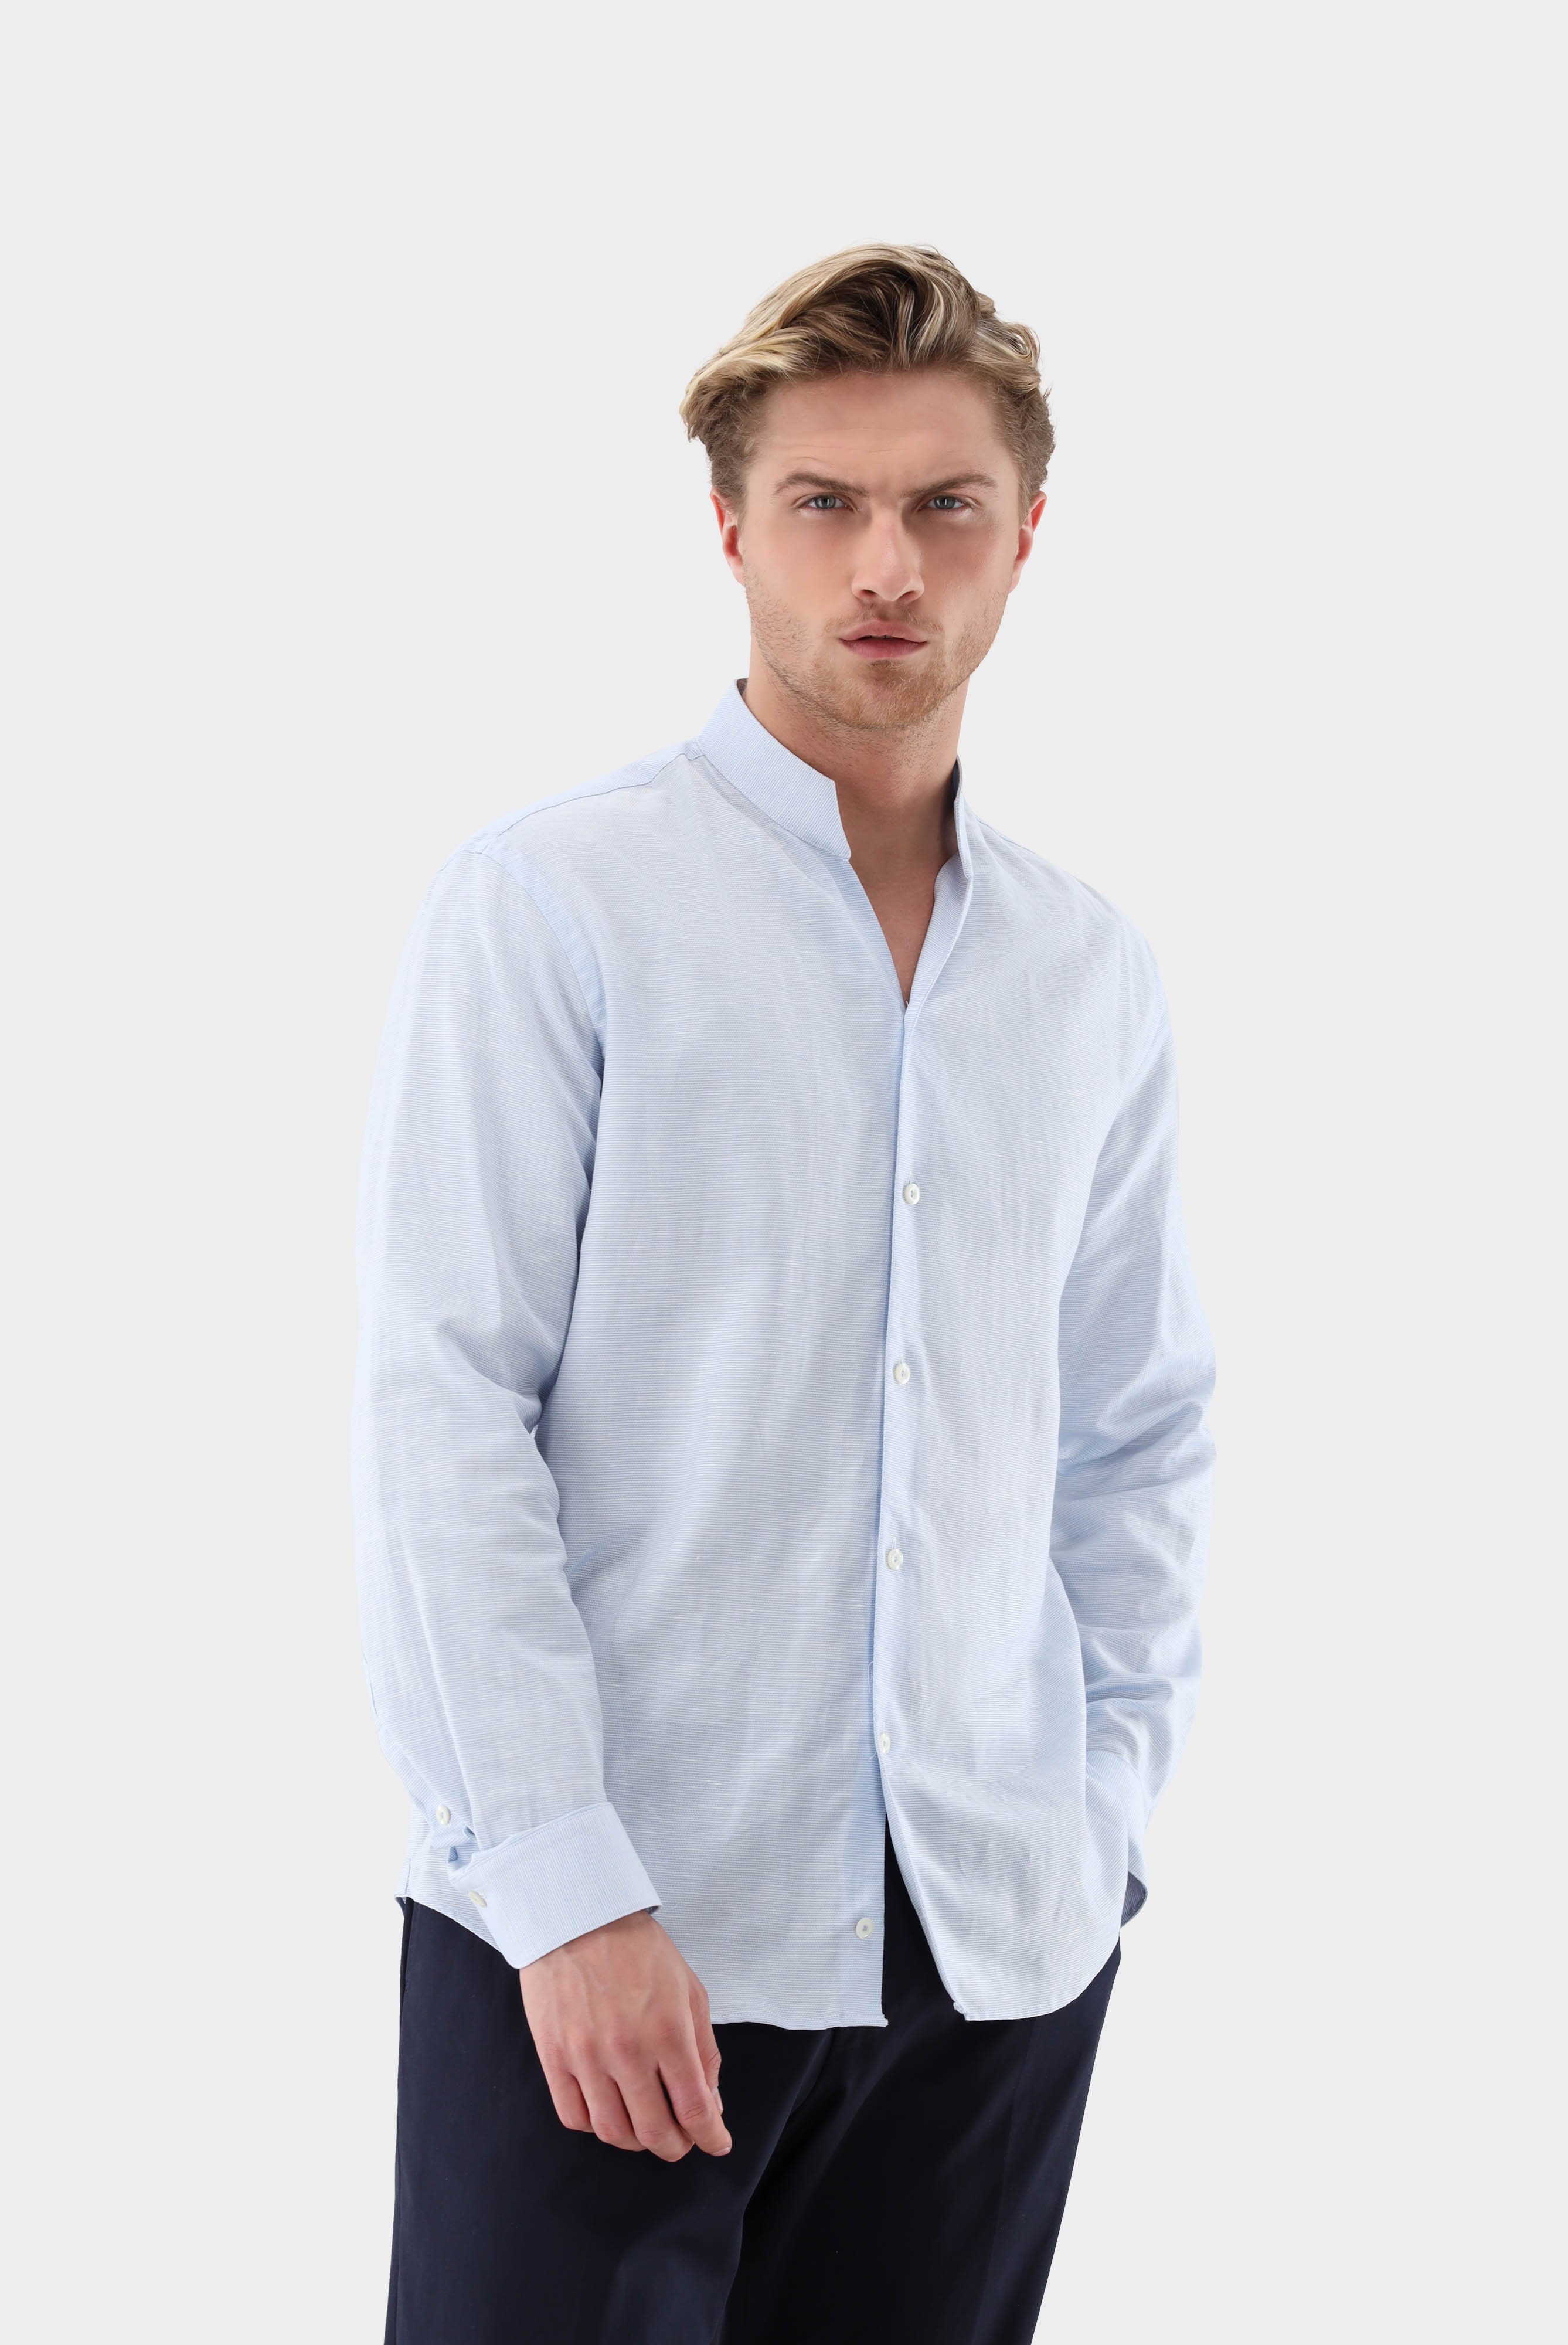 Structured stand-up collar shirt made of cotton and linen